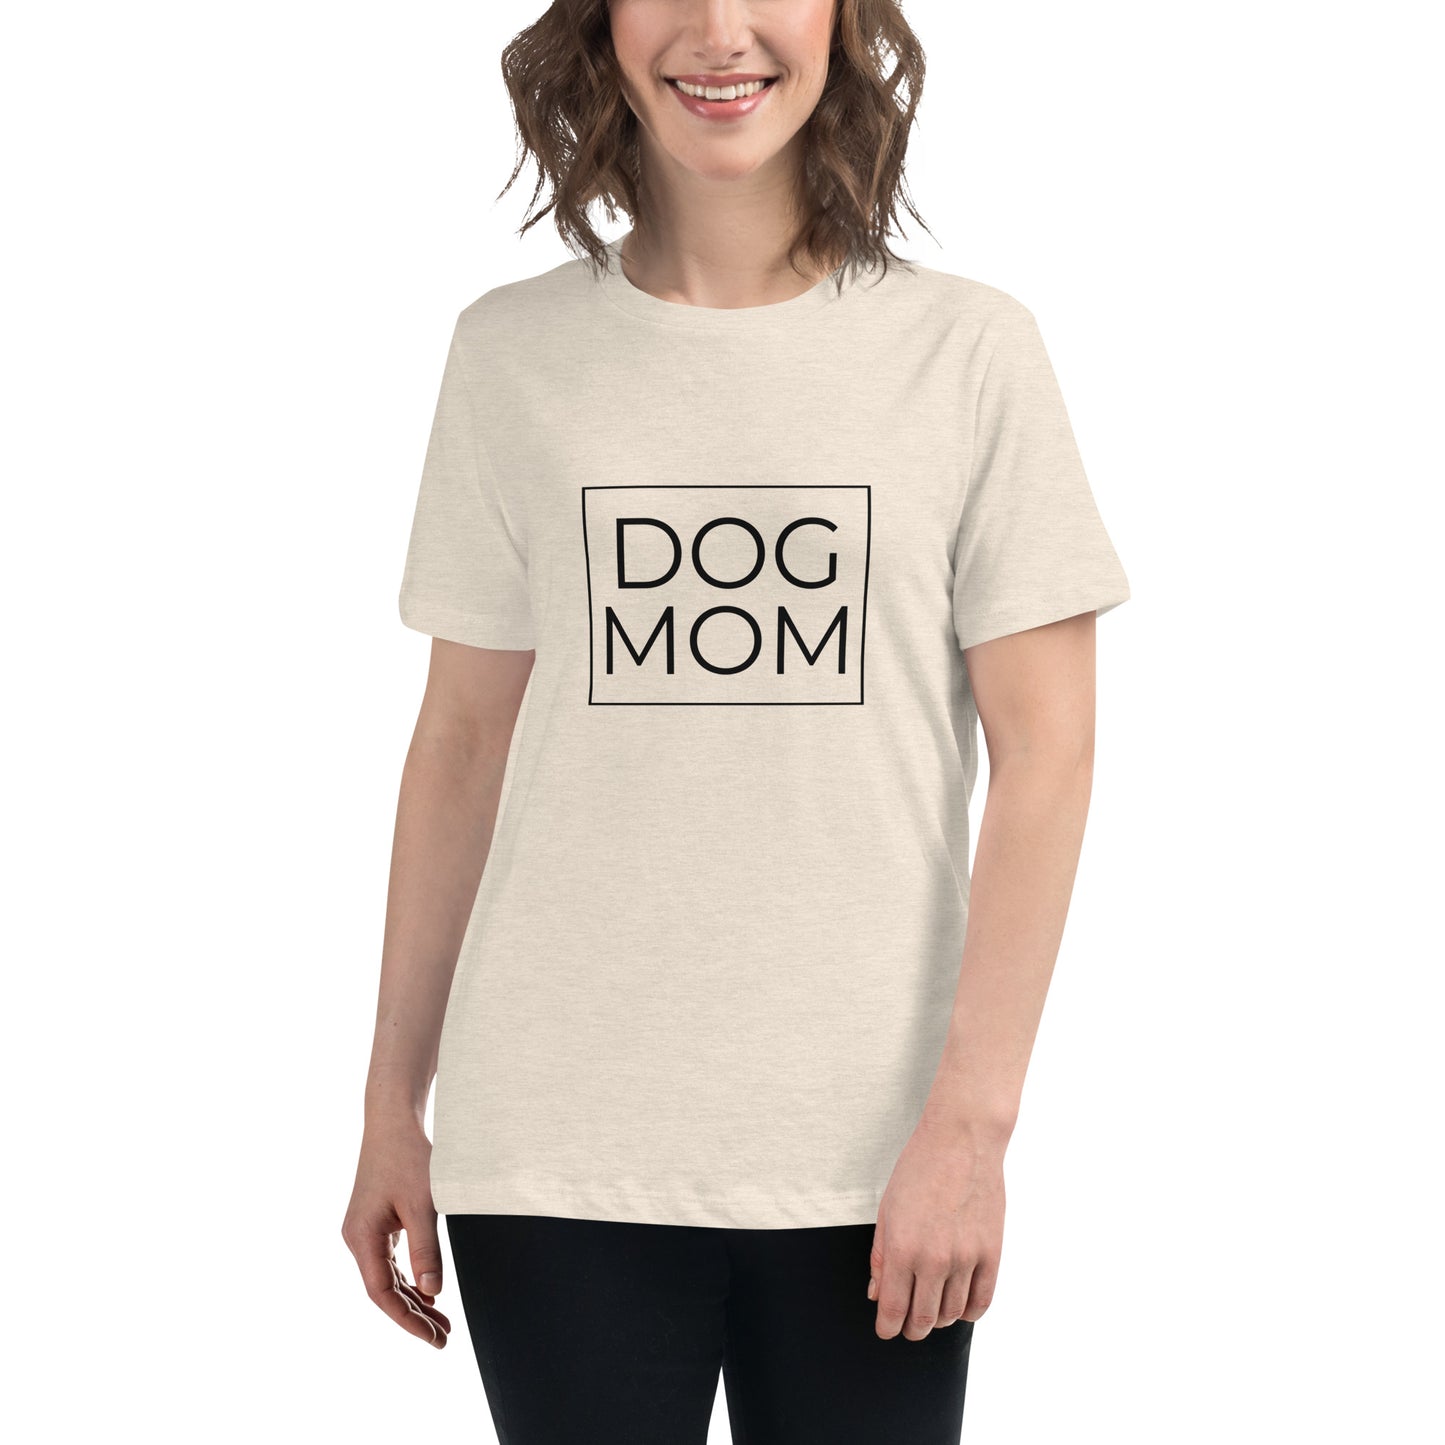 Dog Mom Graphic Women's Relaxed T-Shirt